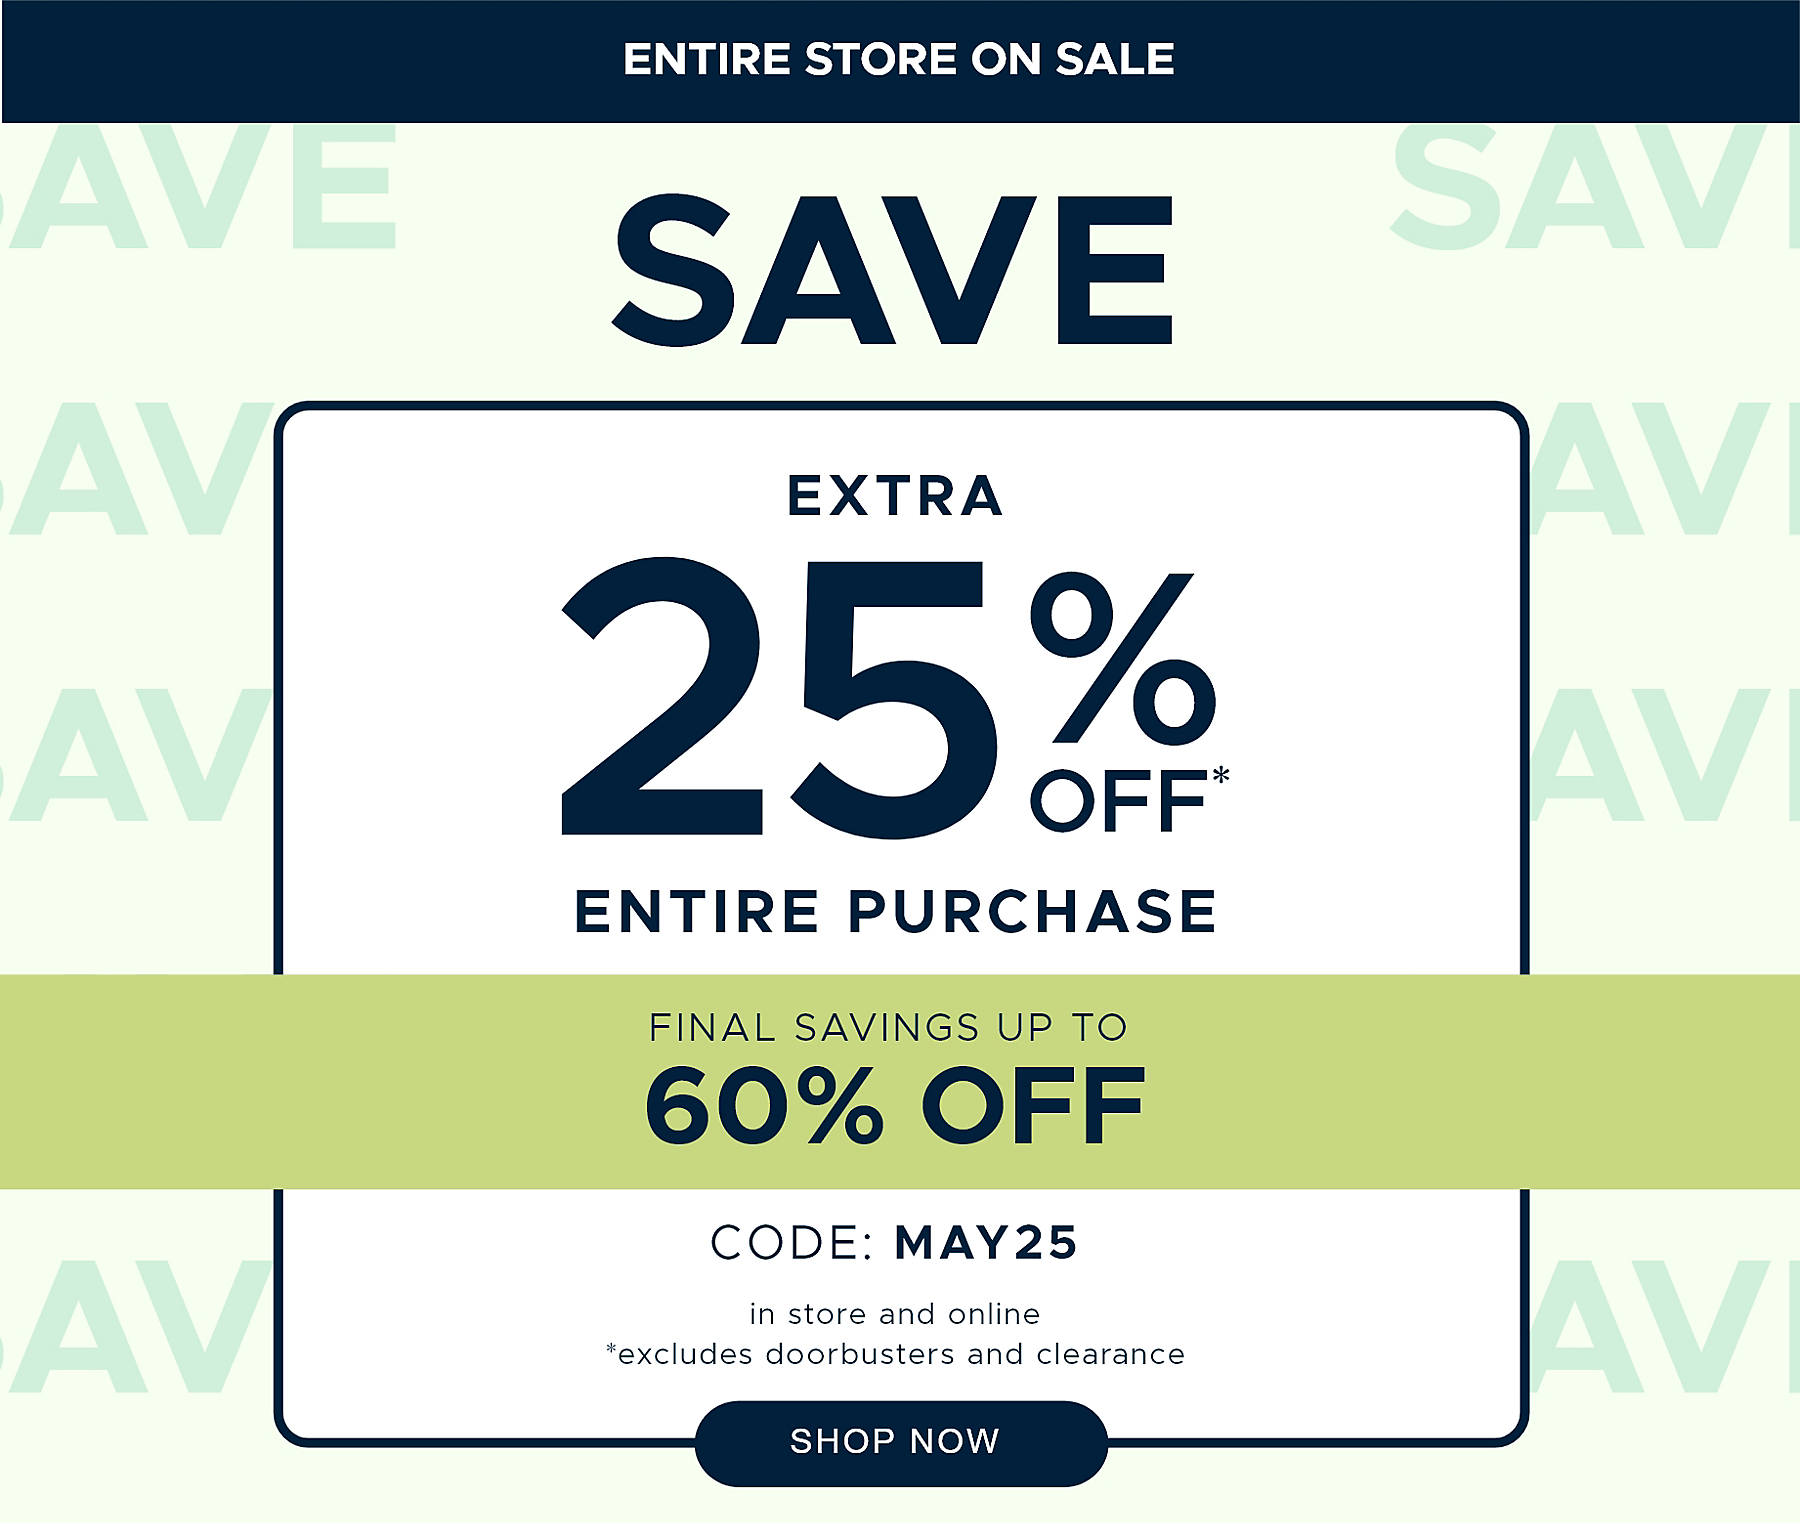 Entire Store on Sale Save extra 25% off* Entire Purchase Final Savings Up to 60% off code: MAY25 in store and online *excludes doorbusters and clearance